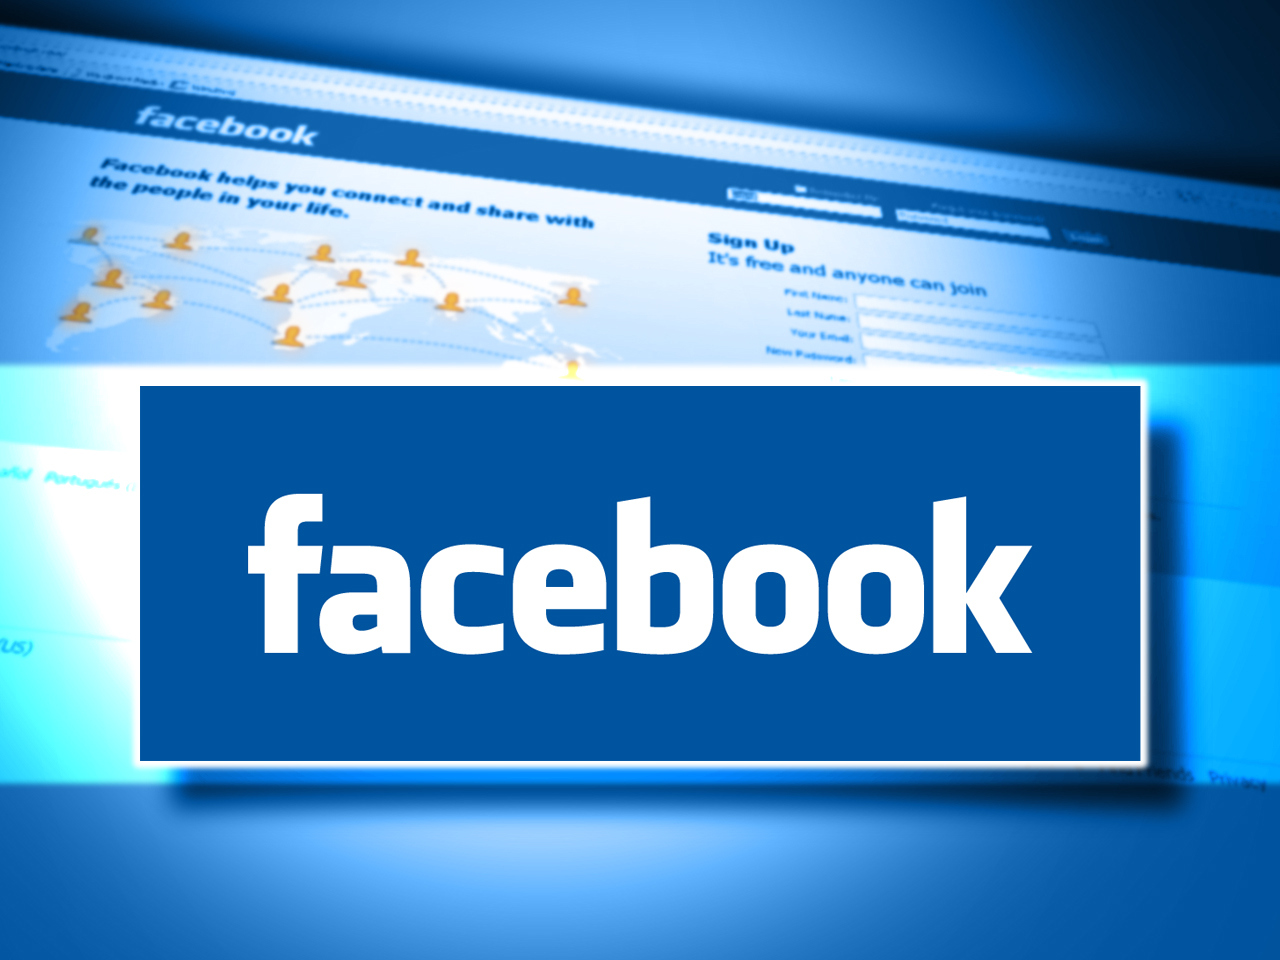 Facebook Auto Like Tool Attracts Popularity